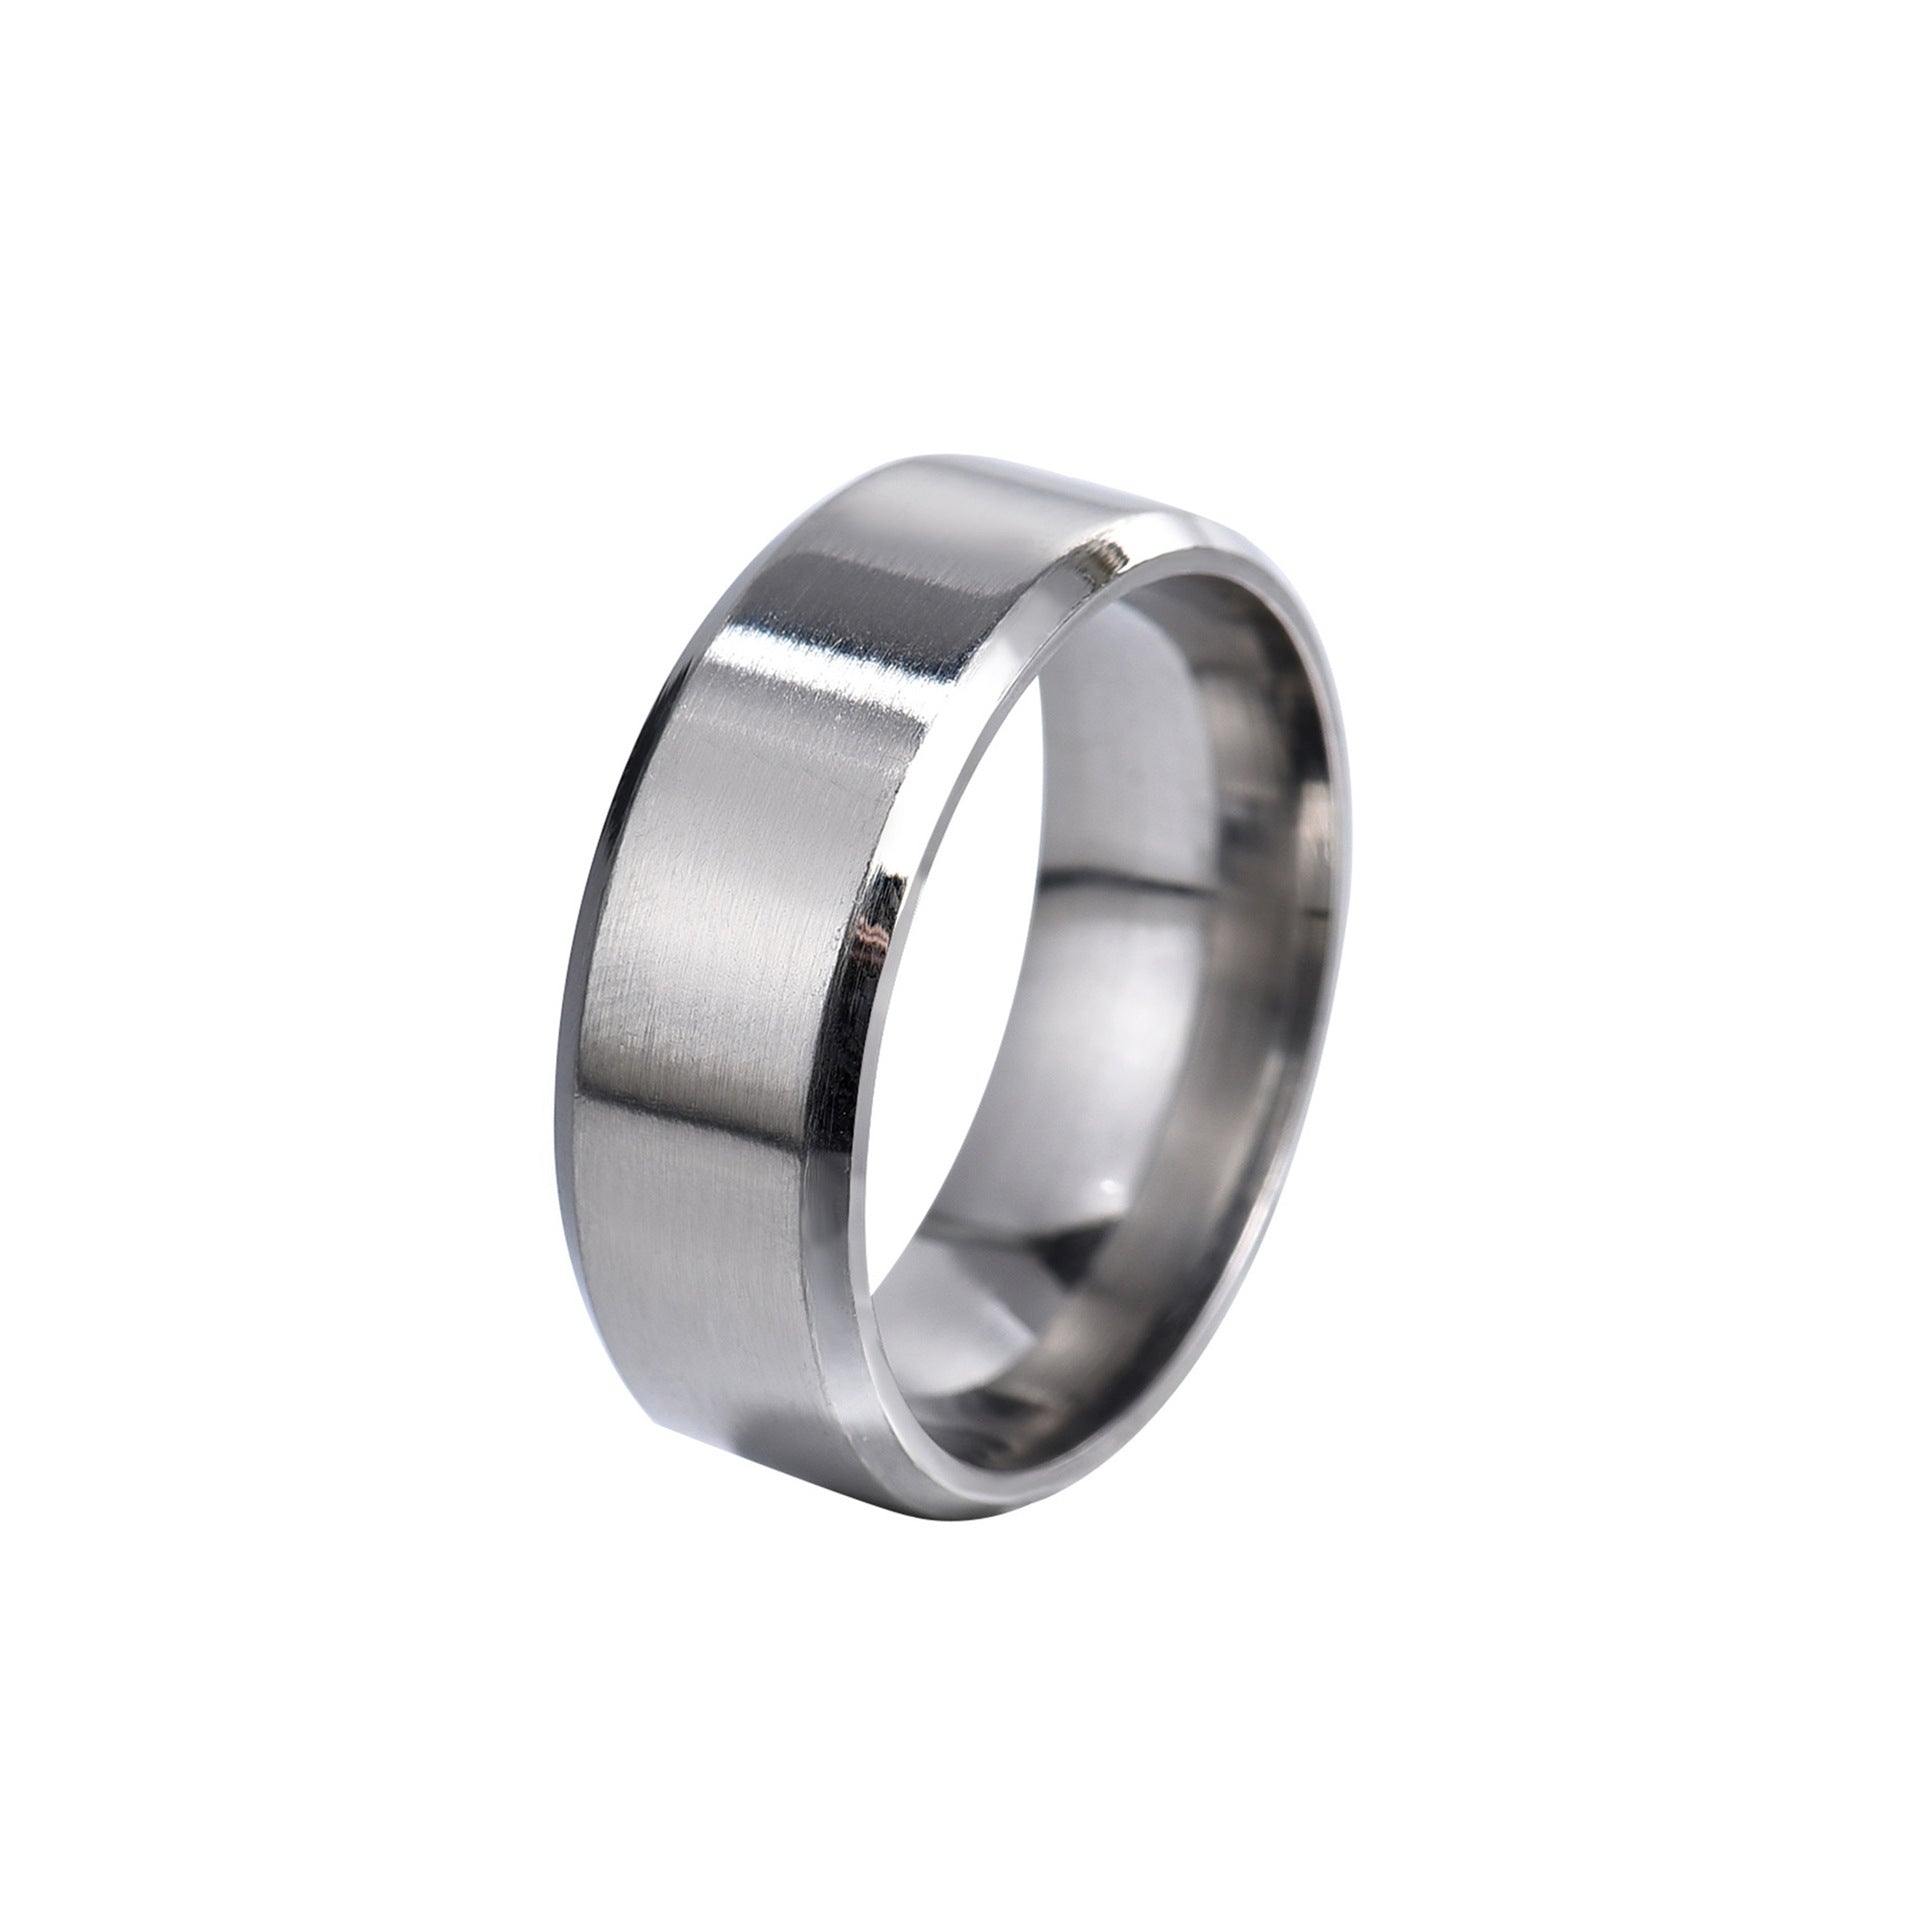 Silver Colored 316L Quality Steel Ring Wedding Ring (15 Size)